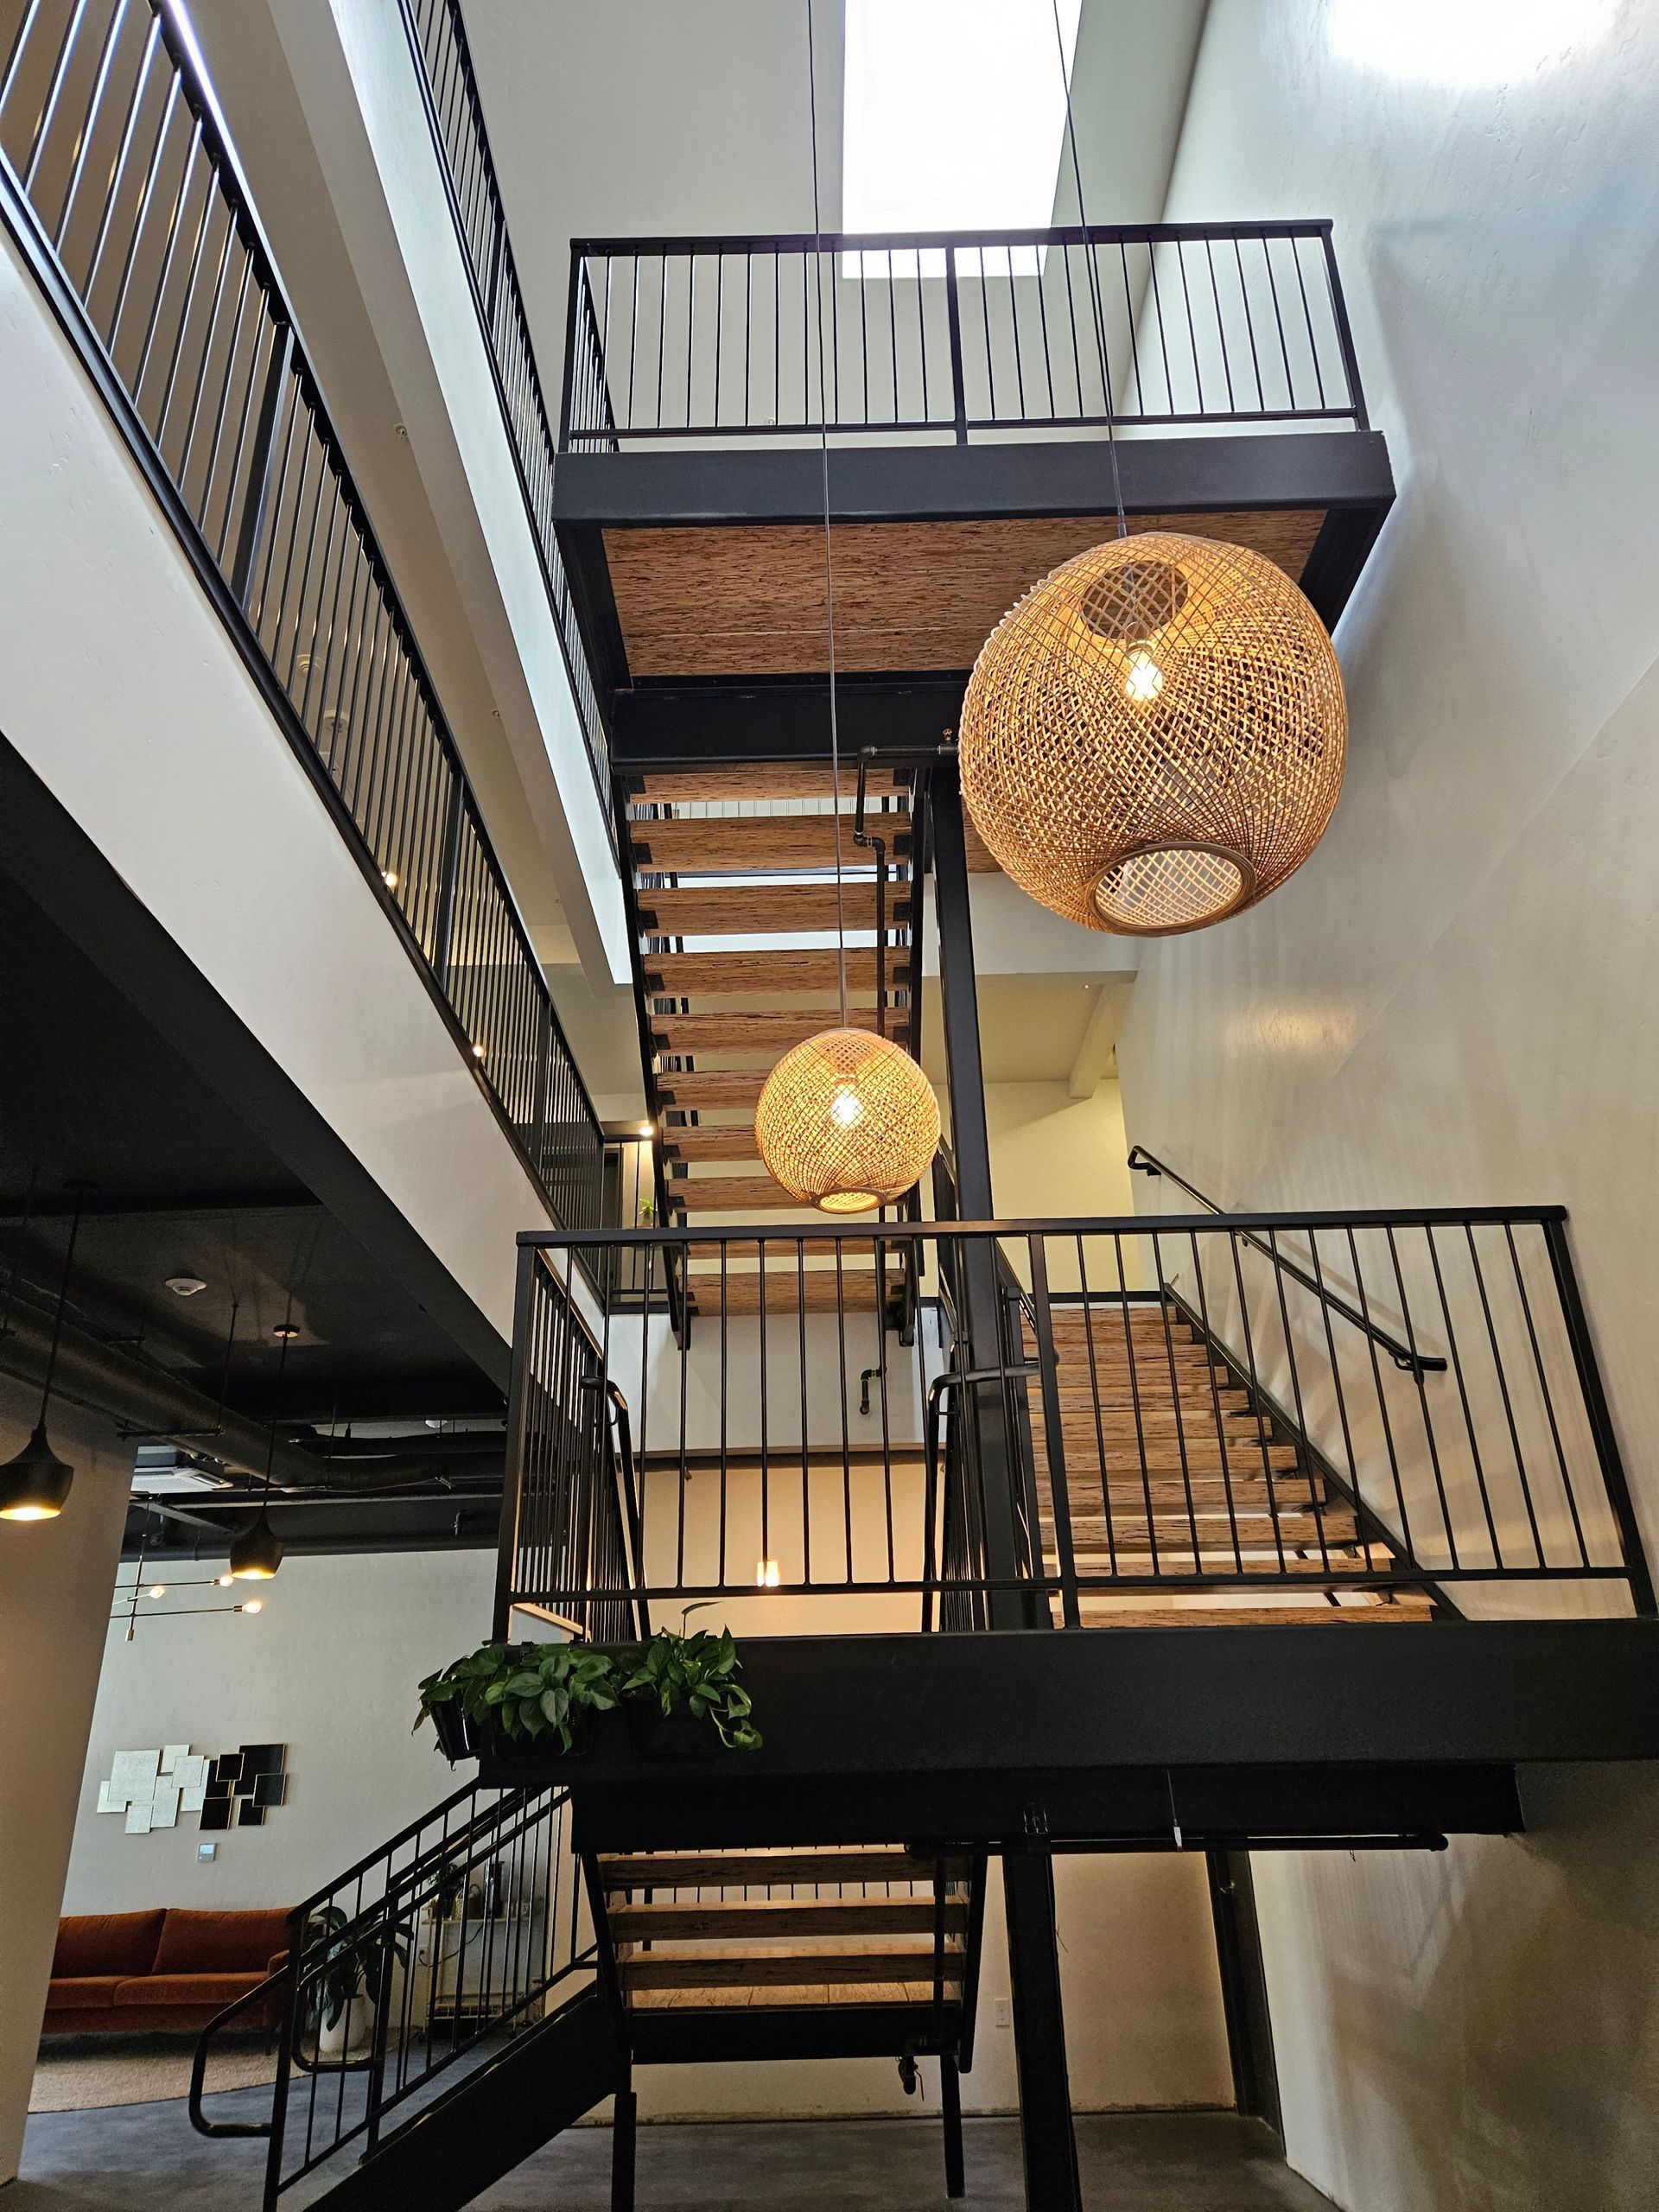 A Building With Stairs And A Balcony With Wicker Lamps Hanging From The Ceiling - Boise, ID - Scott Hedrick Construction